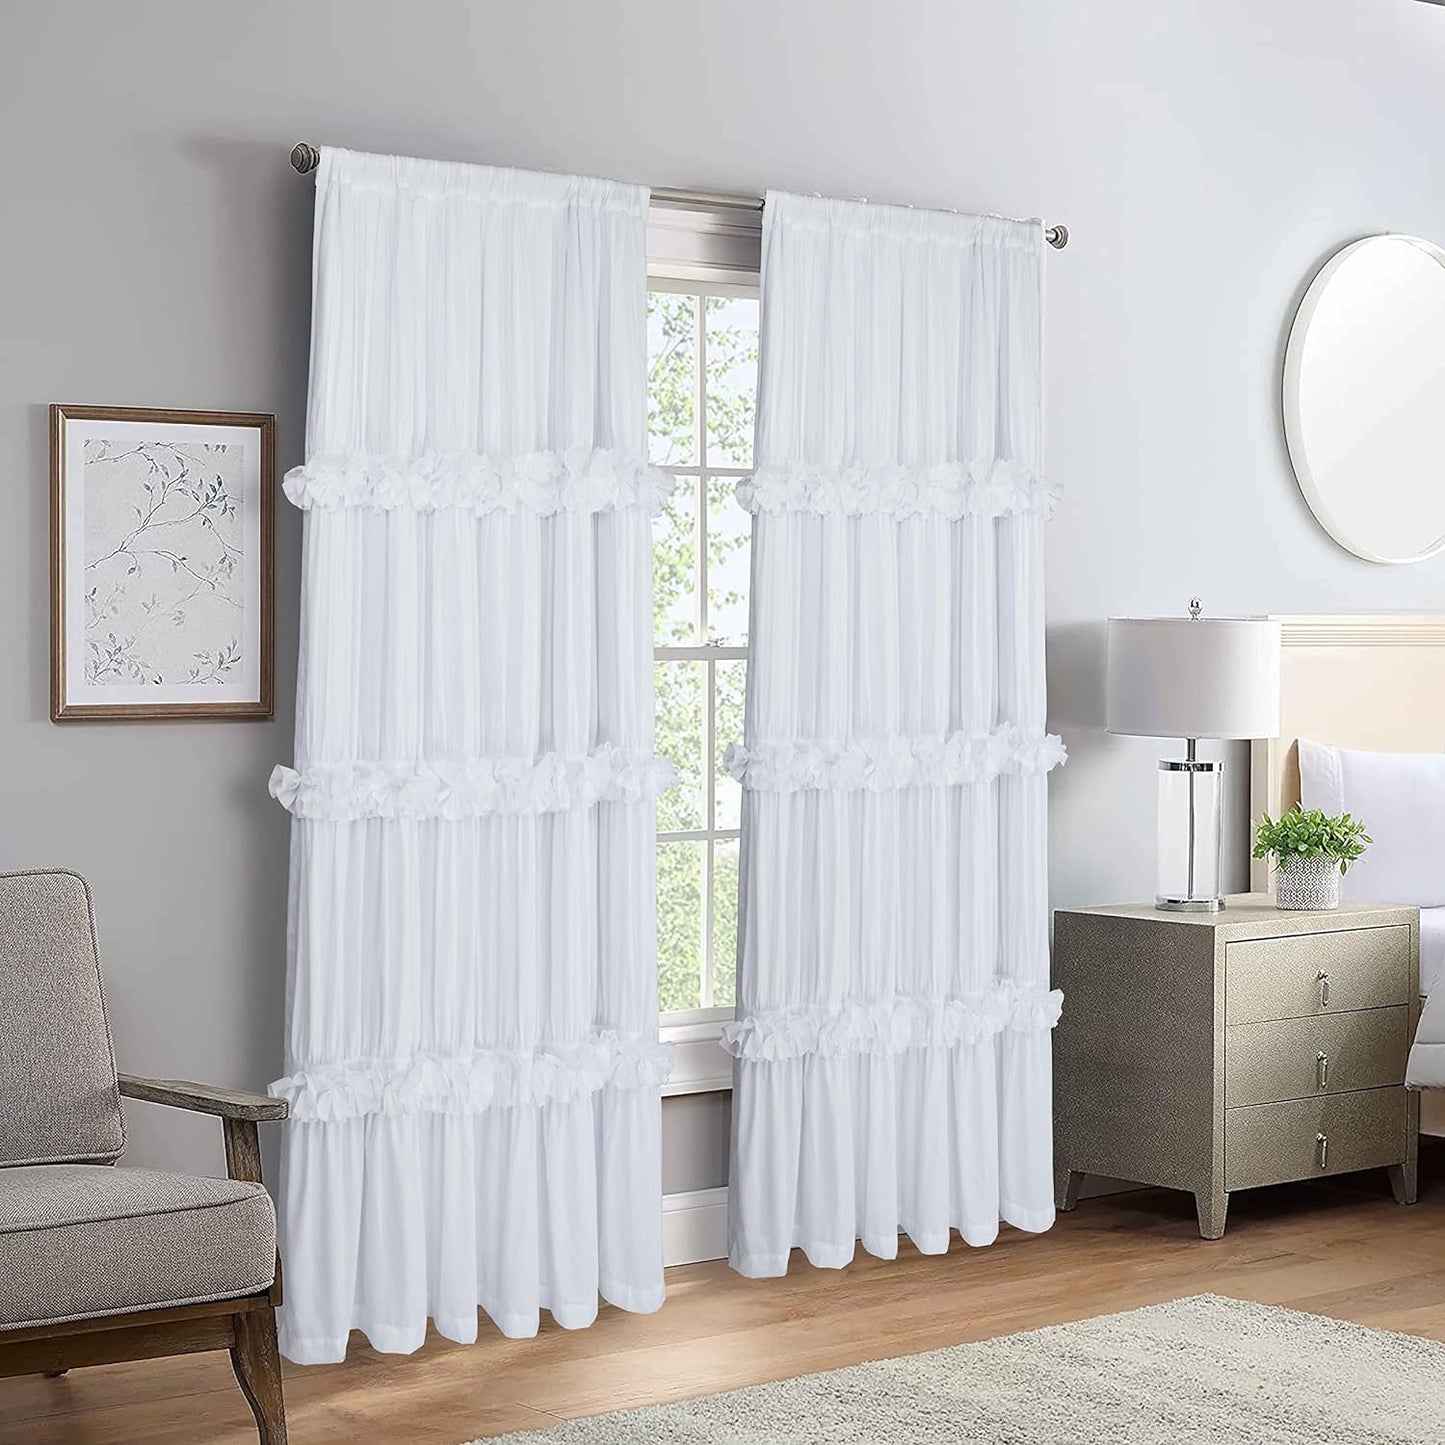 Homechoice Decor Thermal Insulated Blackout Window Curtains, 54" W X 84" L X 2 Panels, Boho Ruched Window Treatments with 3 Rows of Butterfly Flowers, Rustic Rod Pocket Drapes for Room, White (LQ-30)  Homechoice Decor   